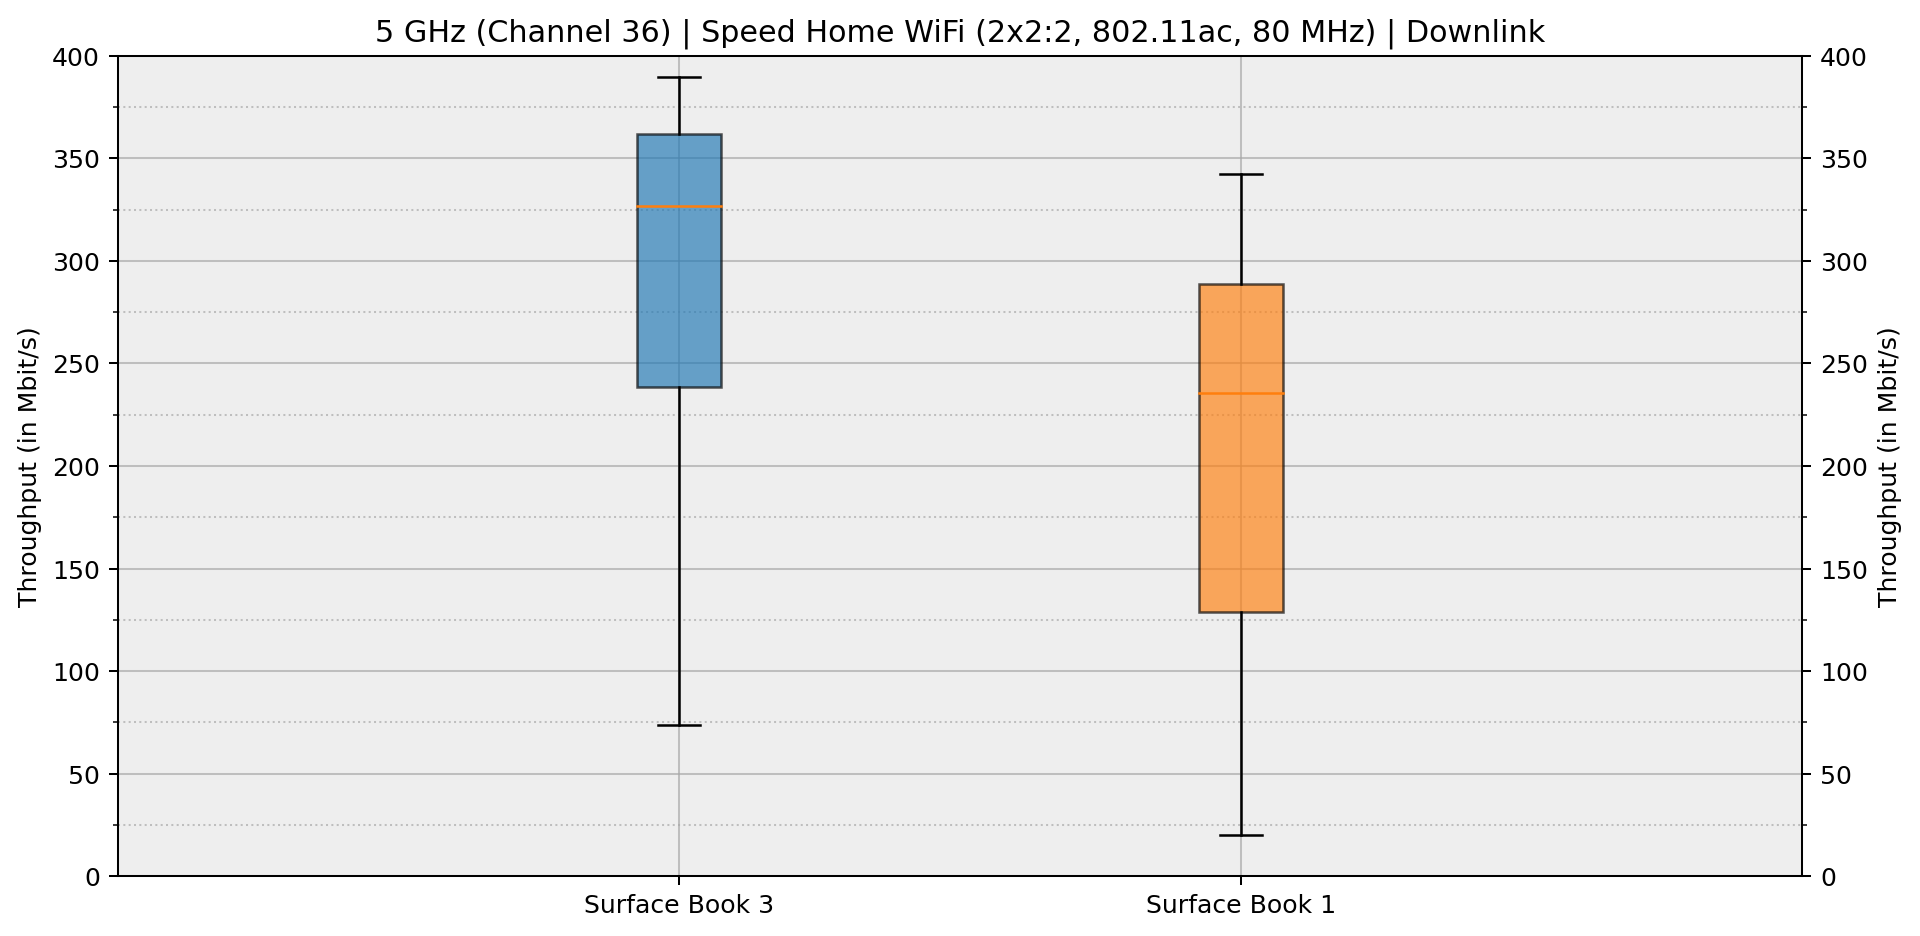 perfcomp-surface_book_3_vs_surface_book_1-box_plot-down.png